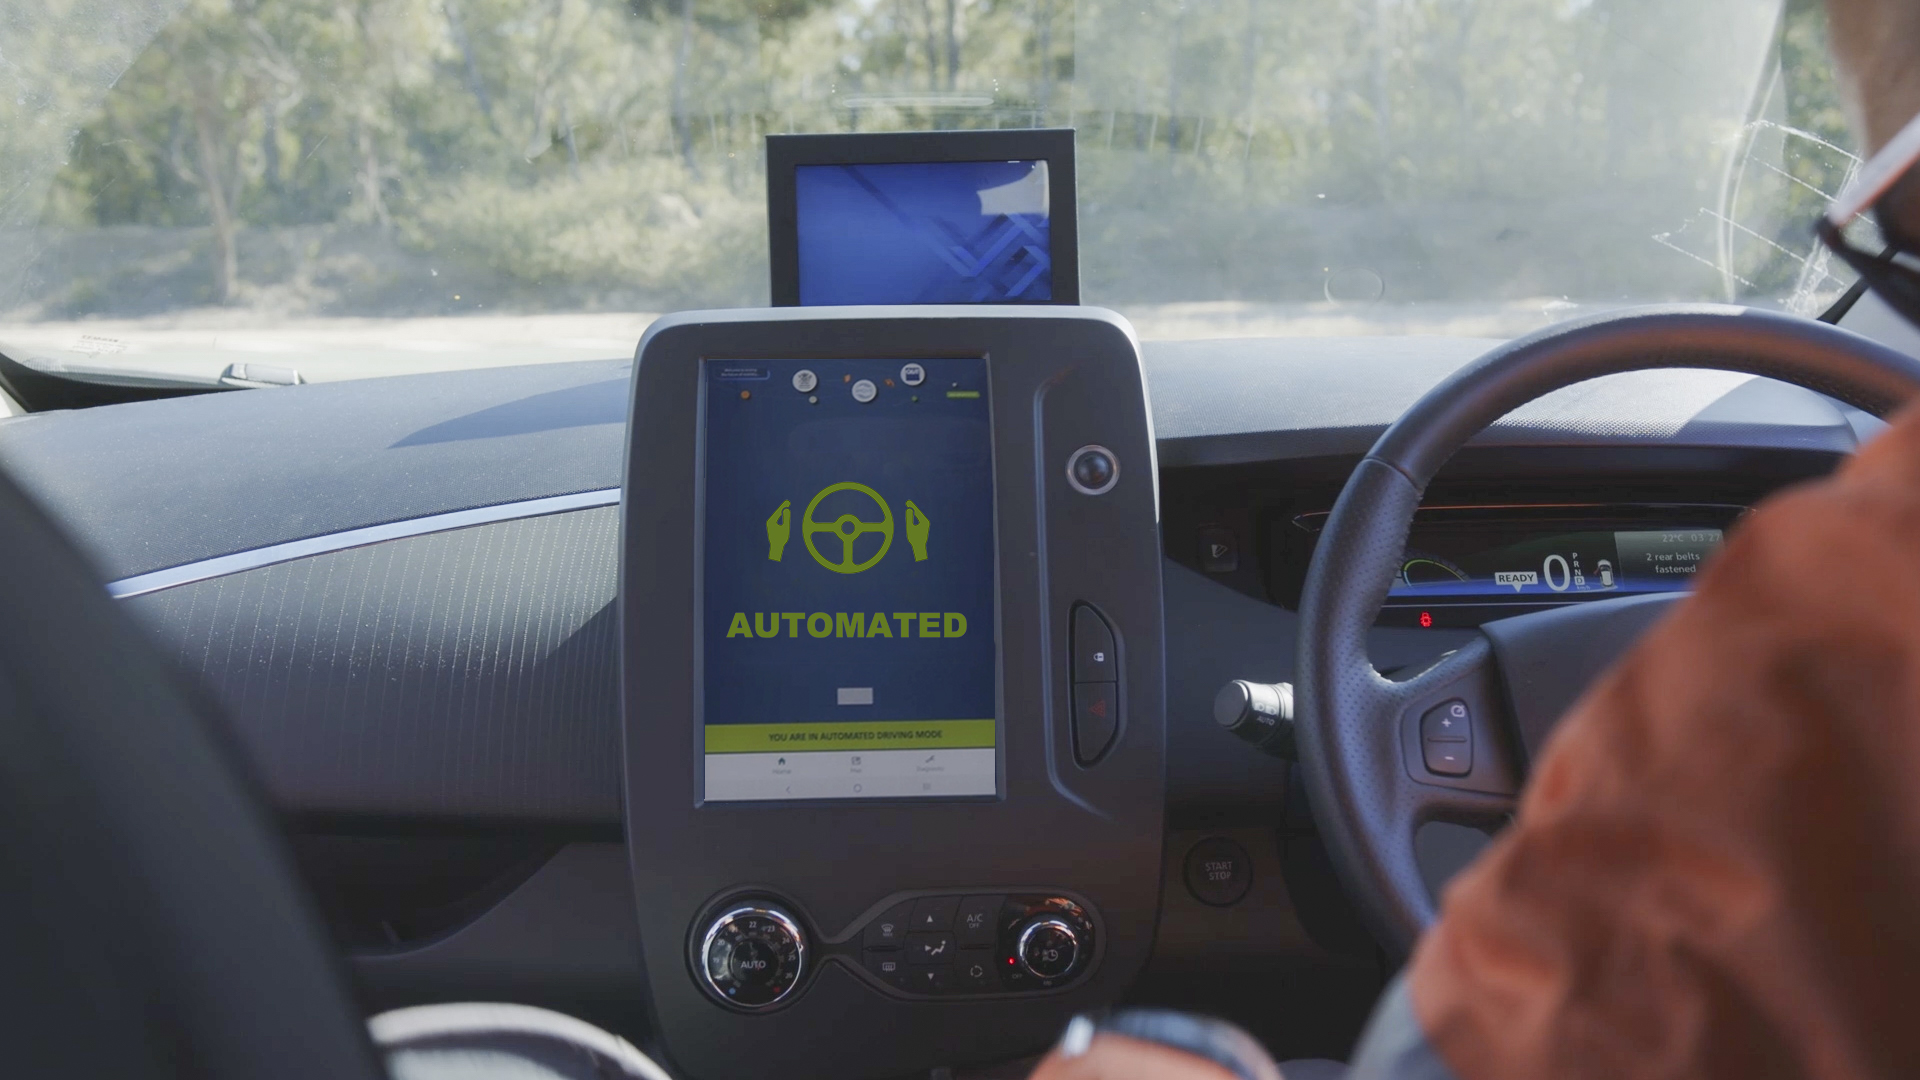 interior console of the automated vehicle ZOE2. A large display screen has a graphic showing hands off a steering wheel with the word "Automated" below.